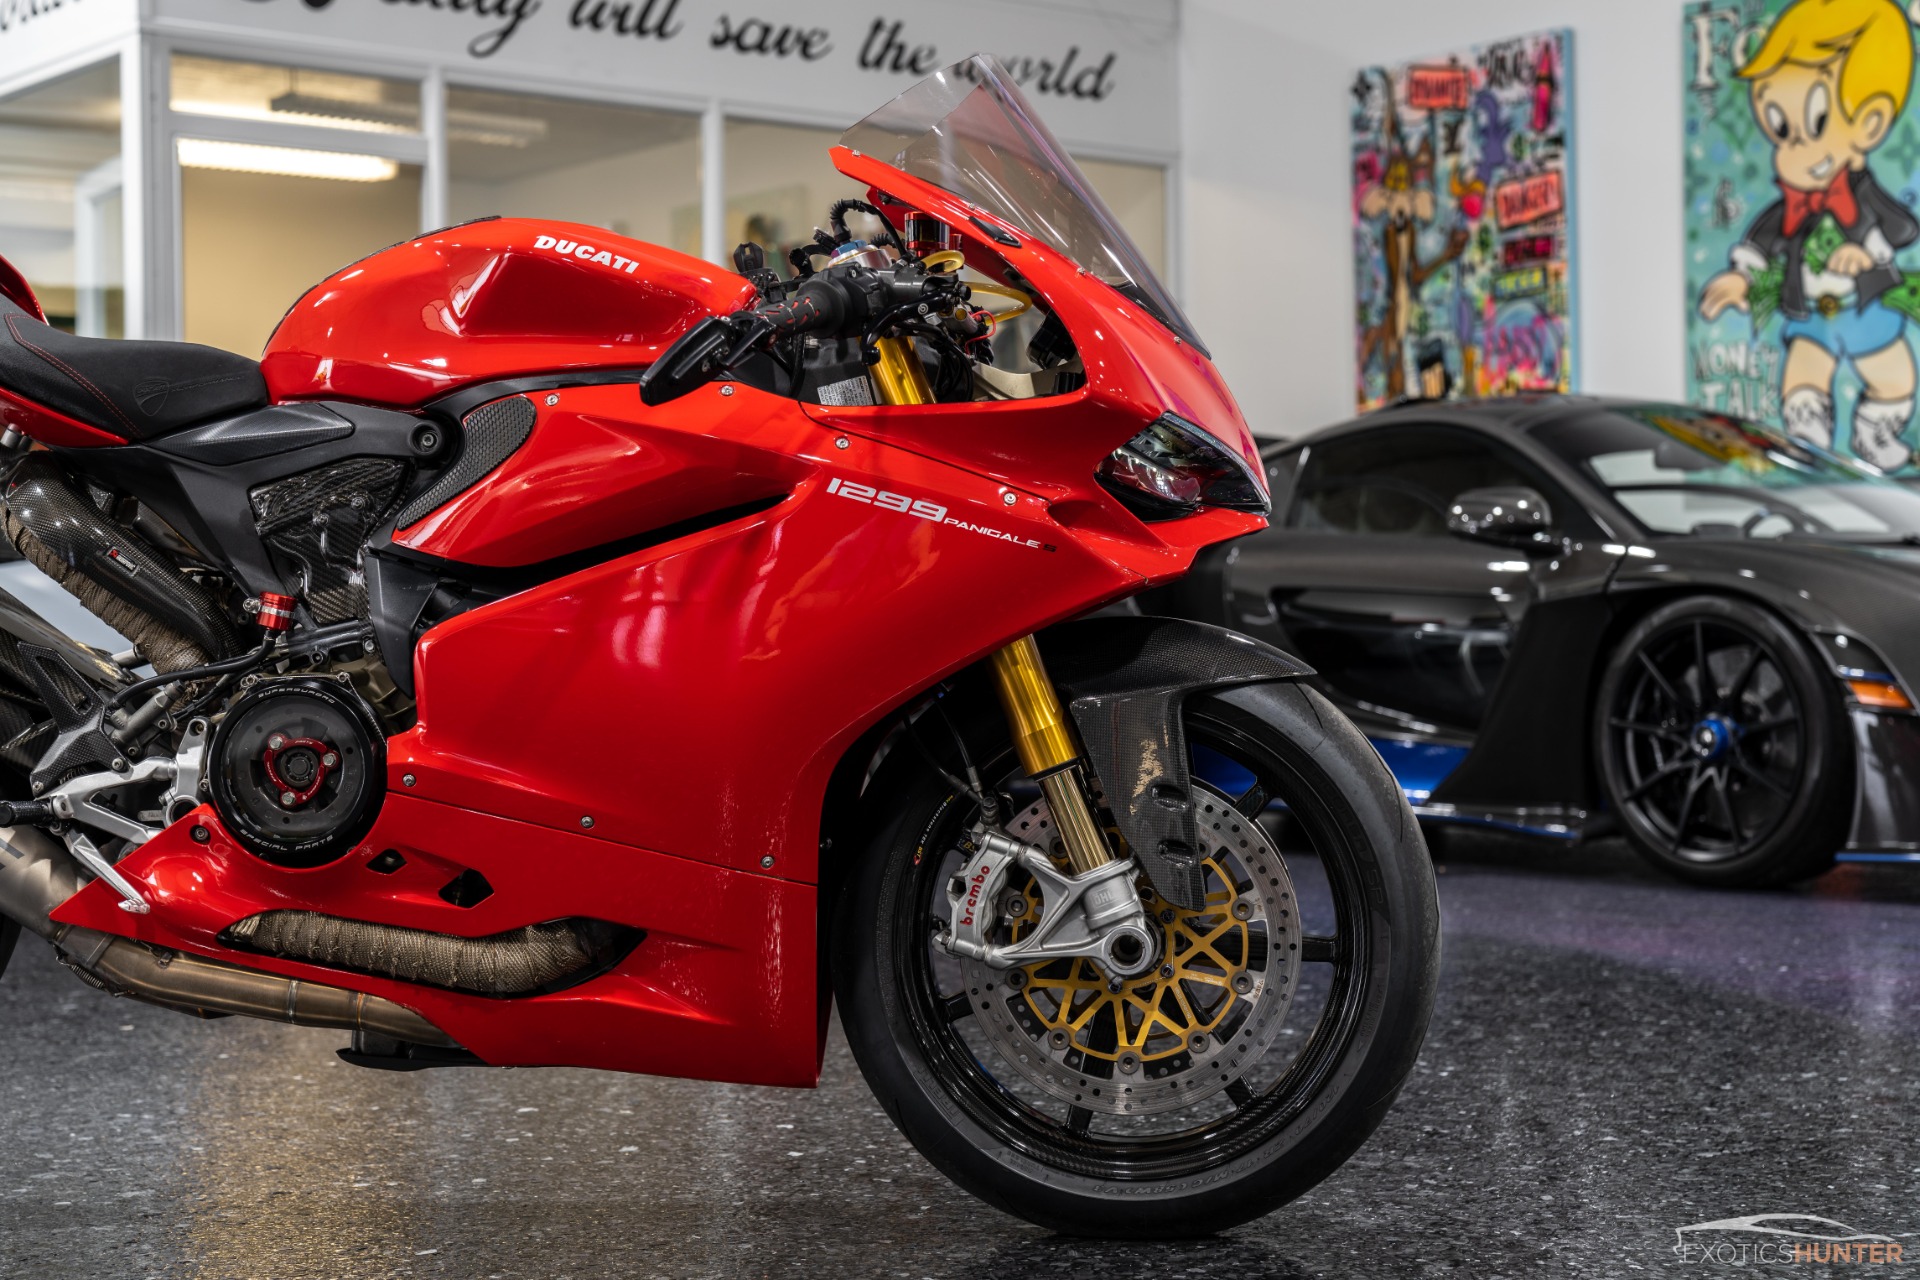 https://www.exoticshunter.com/imagetag/359/main/l/Used-2015-Ducati-Panigale-1299S-w-OVER-15K-in-Mods-BST-Carbon-Wheels-SC-Project-Full-Exhaust-1679058173.jpg